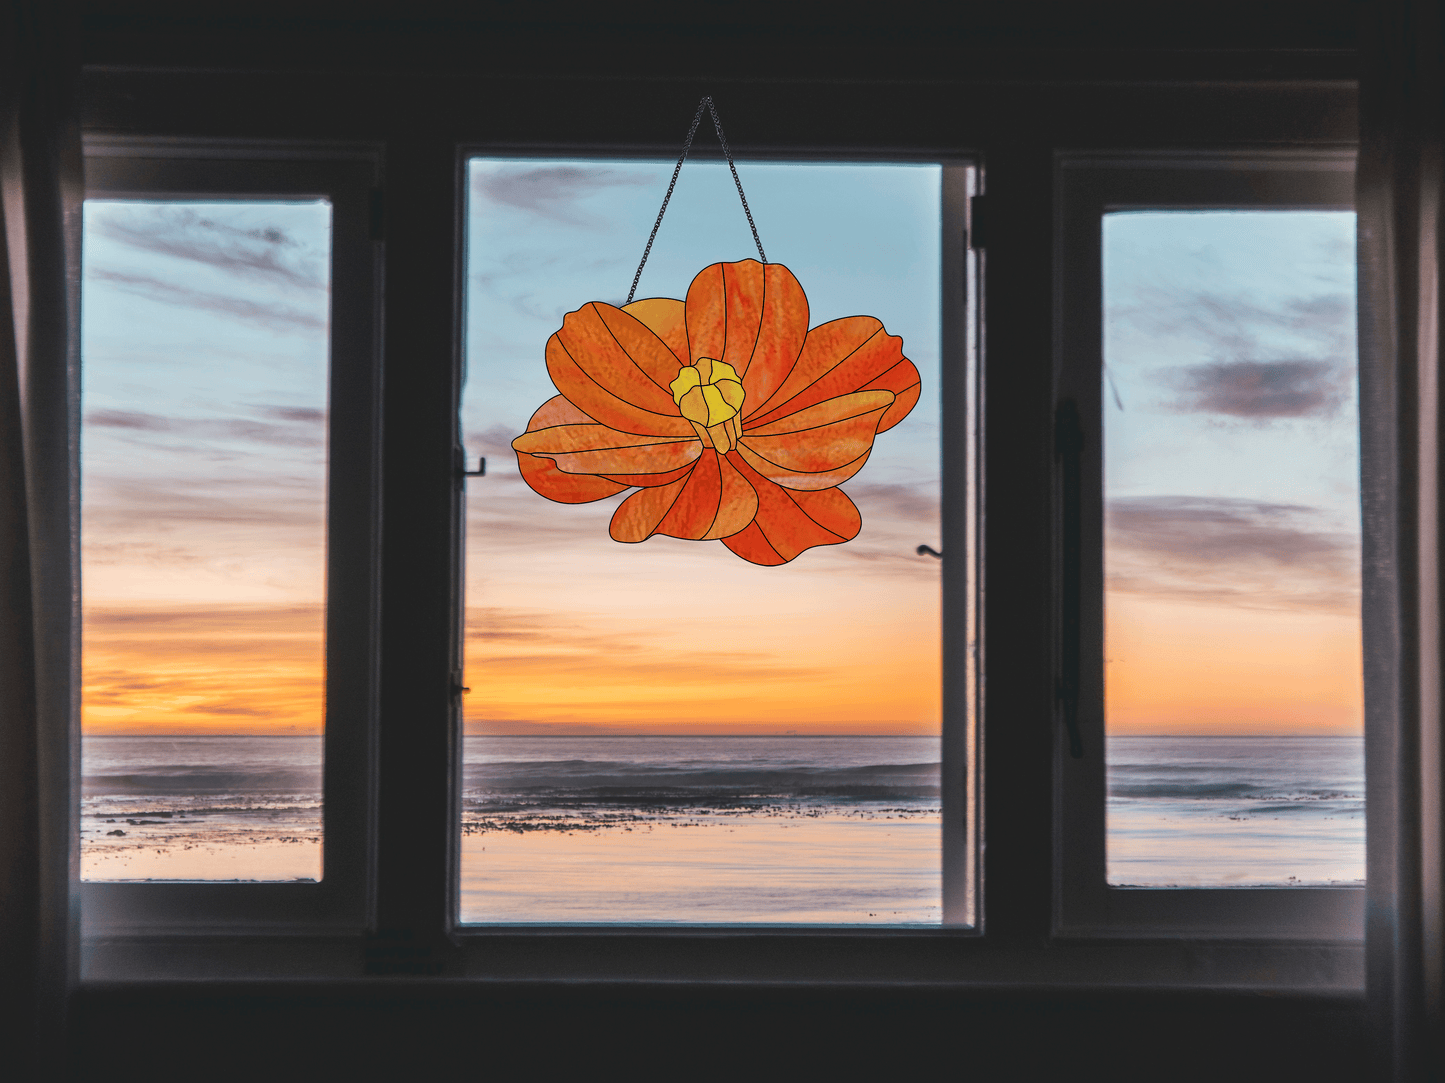 Stained glass pattern for a giant cosmos flower, instant PDF download, shown hanging in a window with a sunset